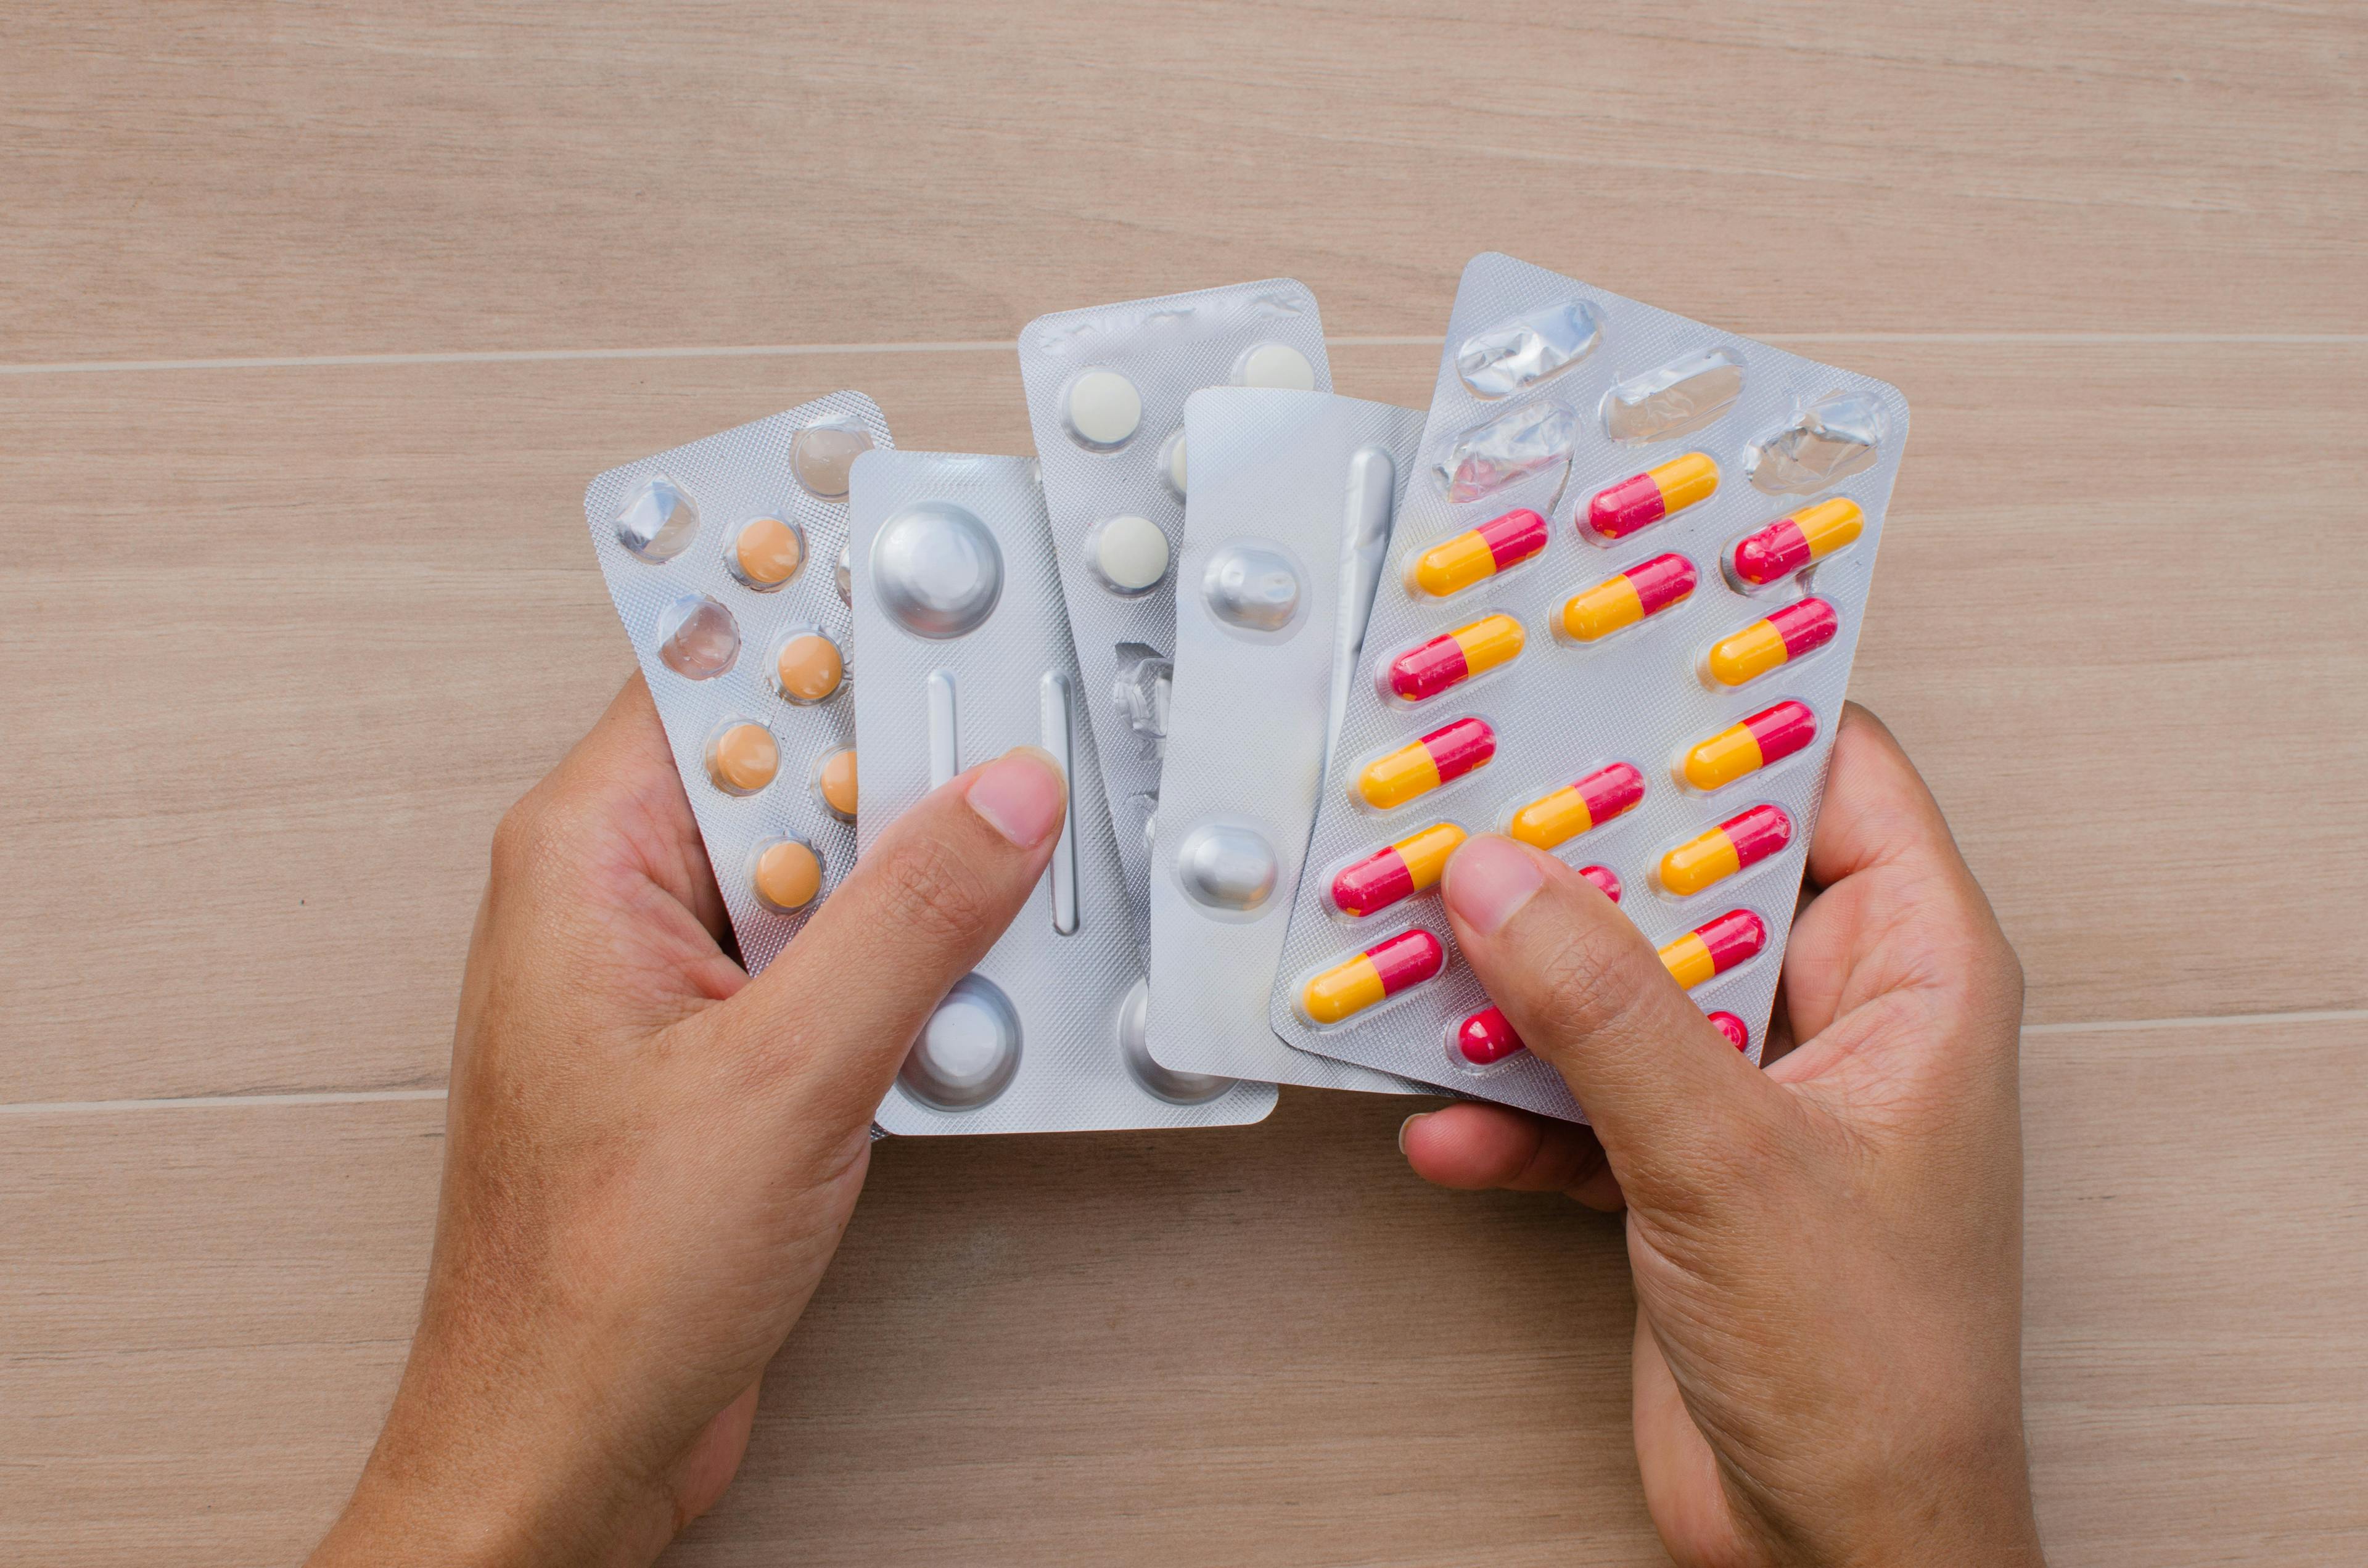 a person holding five blister packs of pills | Image credit: JEROSenneGs stock.adobe.com